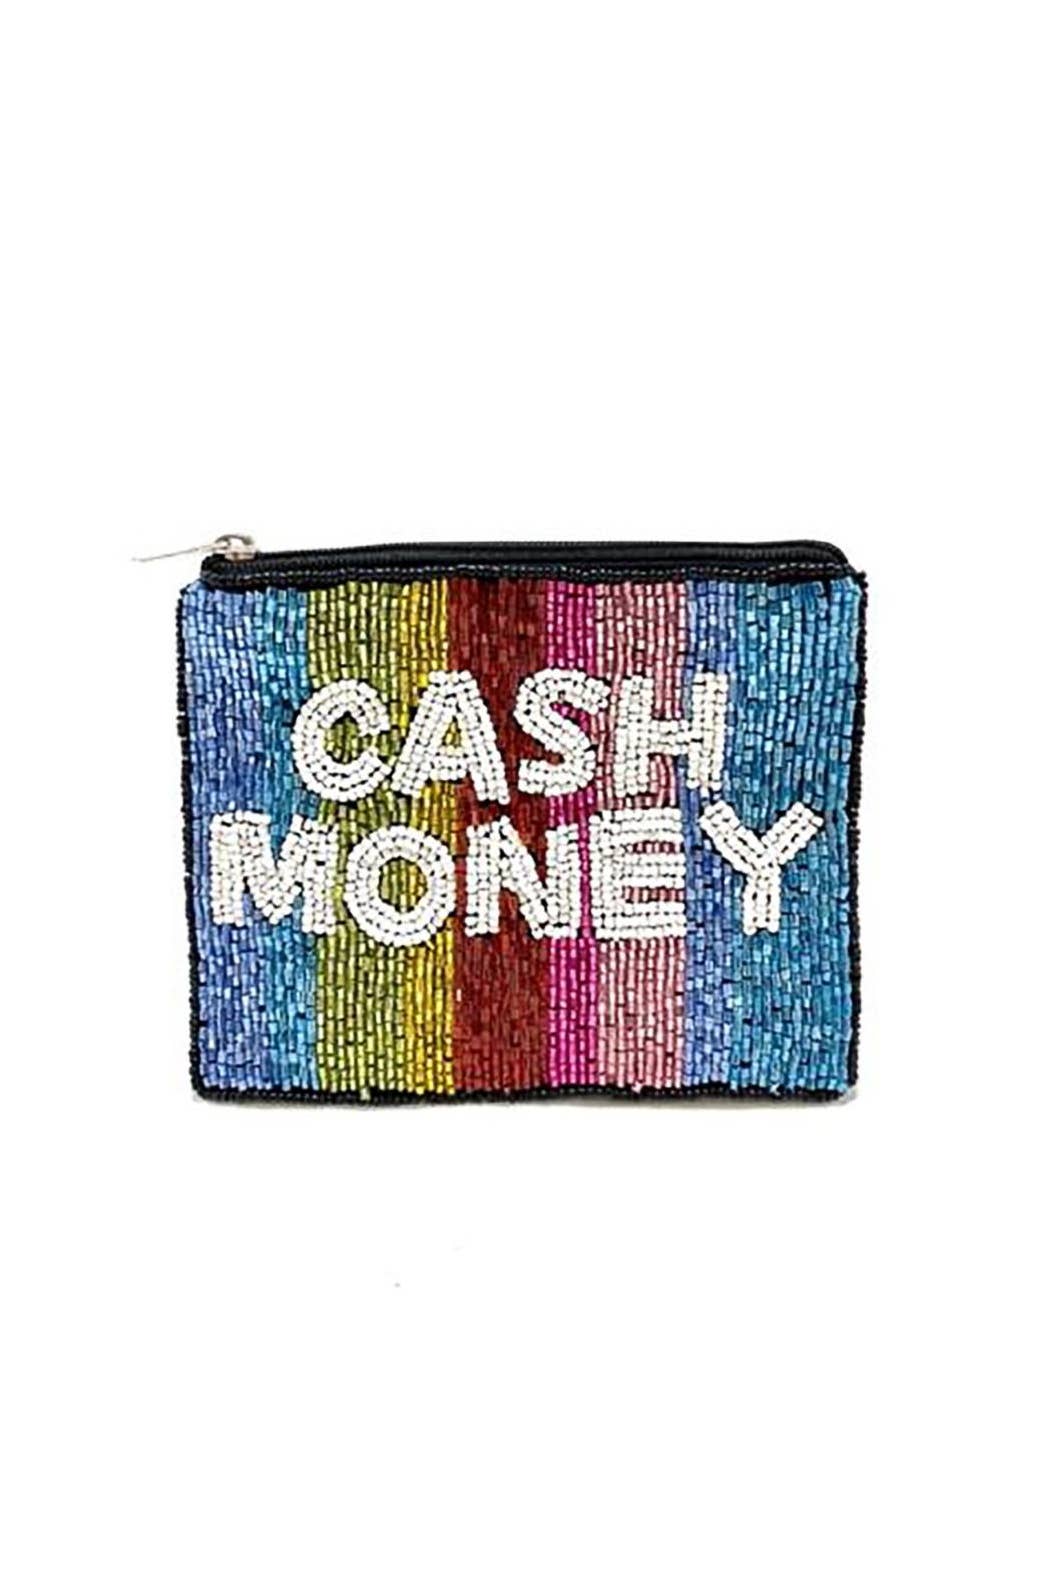 Embellish Your Life - Cash Money Beaded Pouch